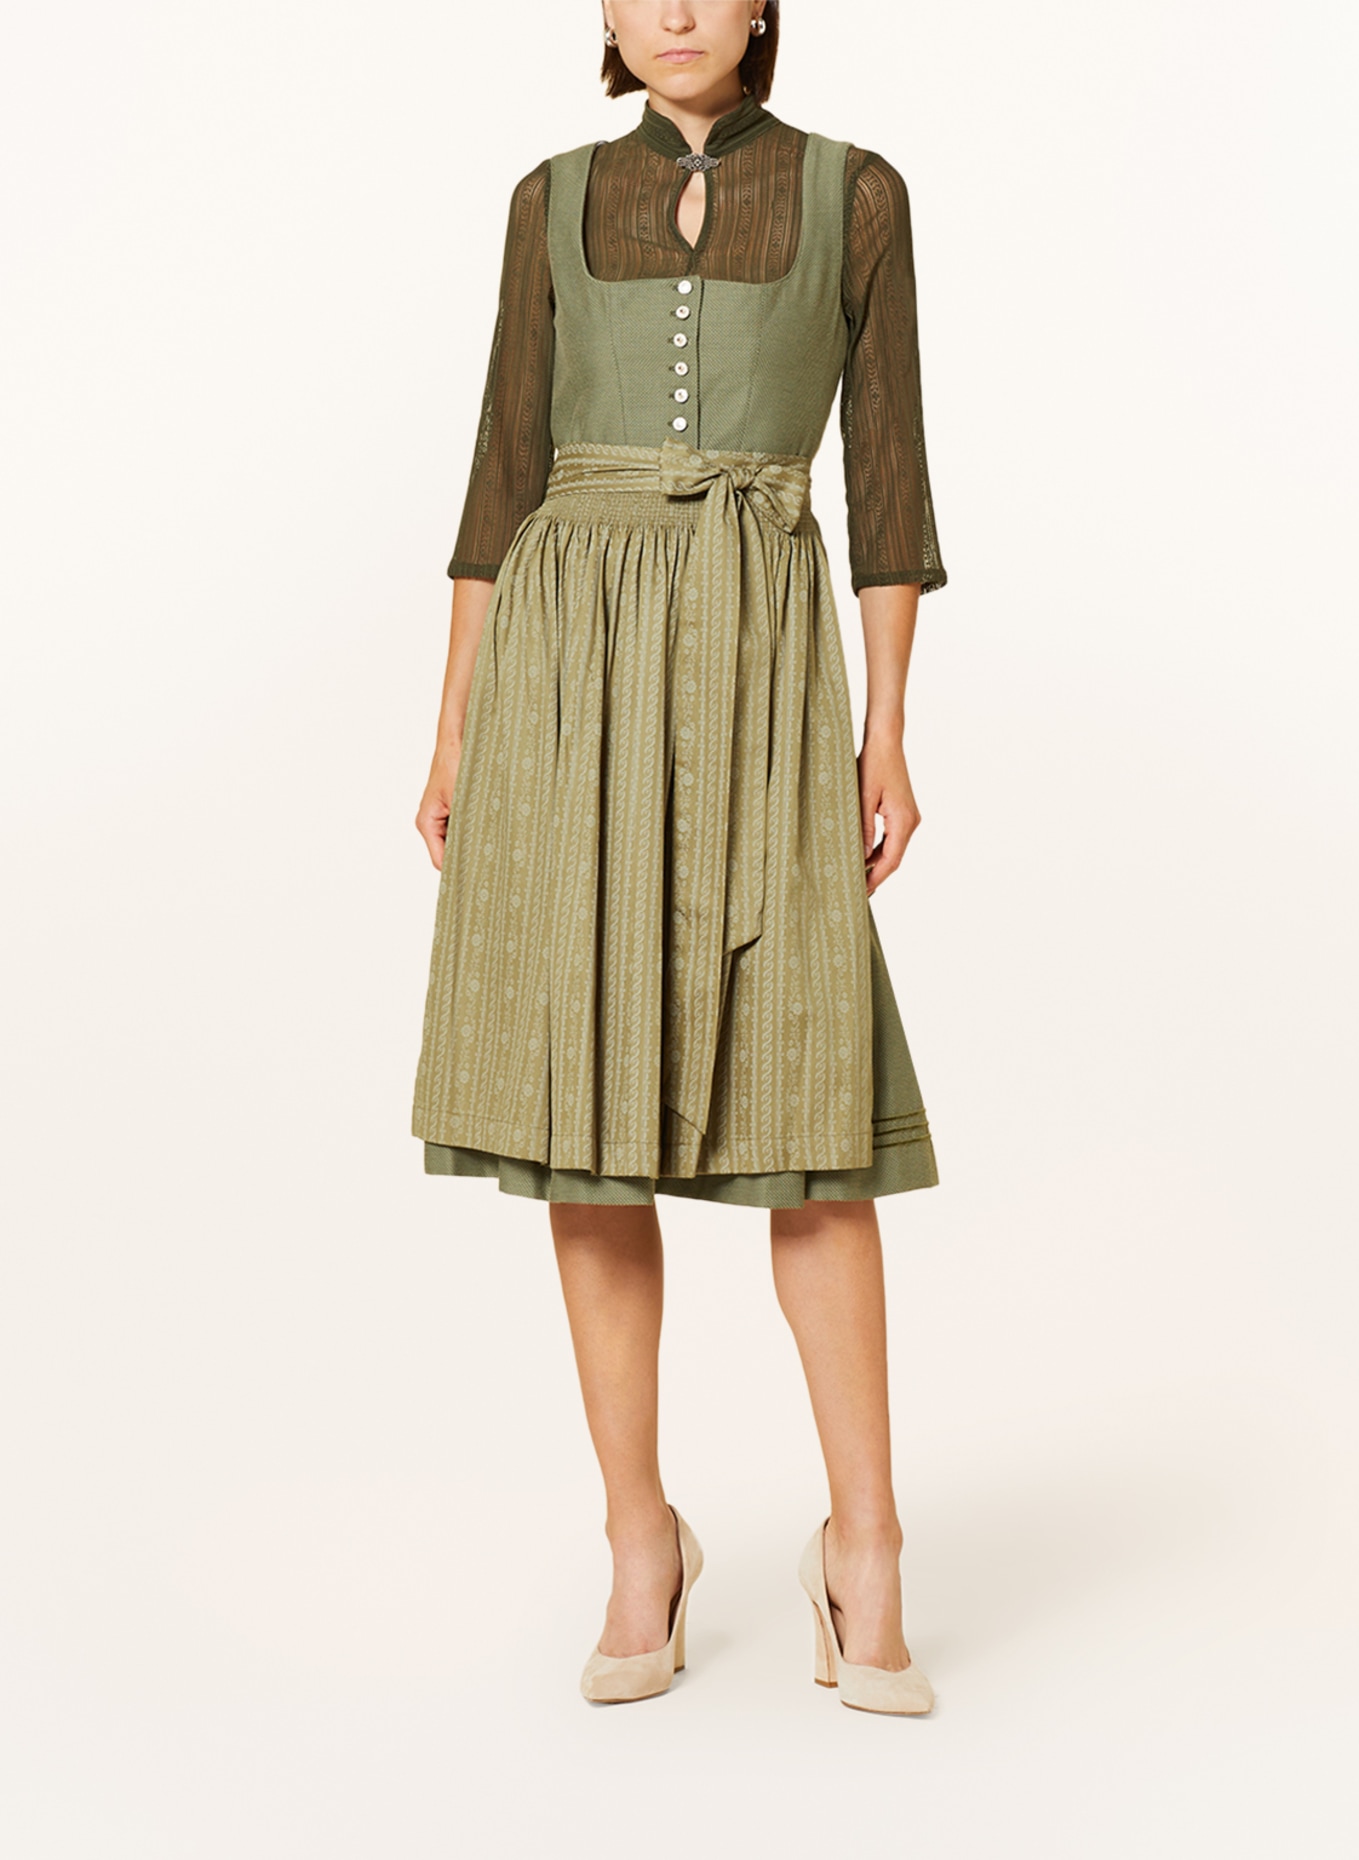 BERWIN & WOLFF Dirndl blouse made of crochet lace, Color: OLIVE (Image 4)